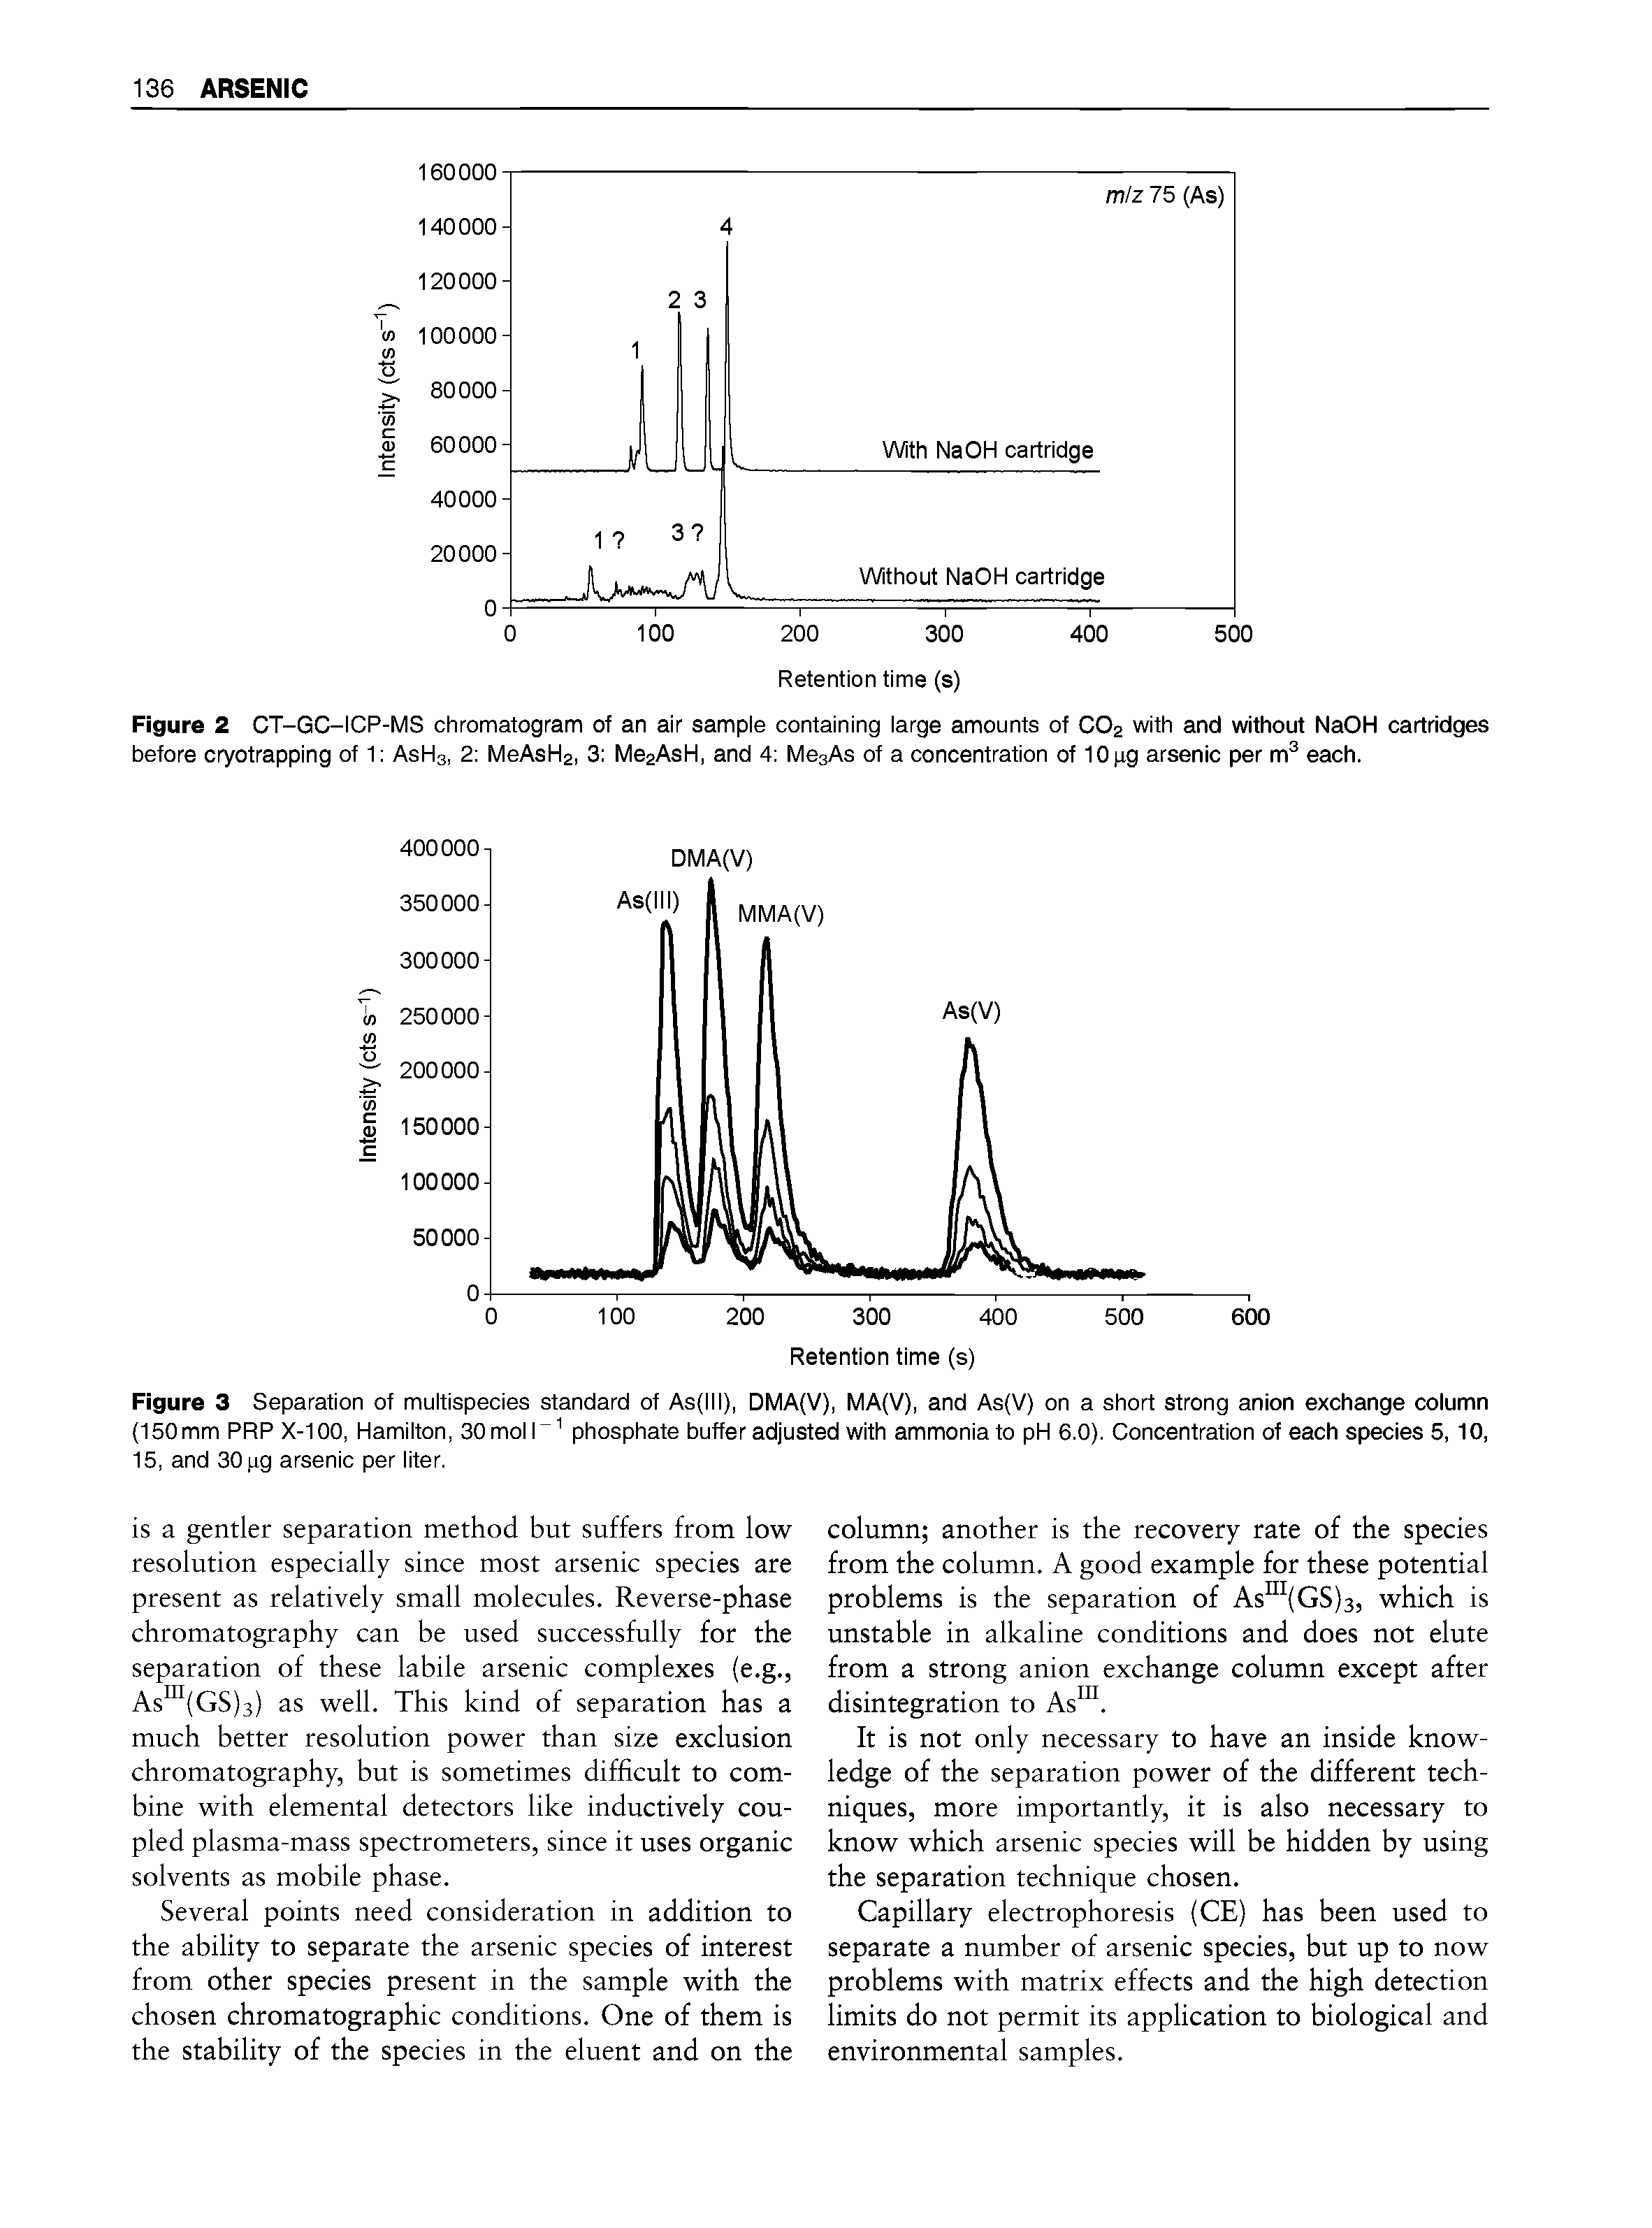 Figure 3 Separation of multispecies standard of As lll), DMA(V), MA(V), and As V) on a short strong anion exchange column (150 mm PRP X-100, Hamilton, 30 mol 1 phosphate buffer adjusted with ammonia to pH 6.0). Concentration of each species 5,10, 15, and 30 ng arsenic per liter.